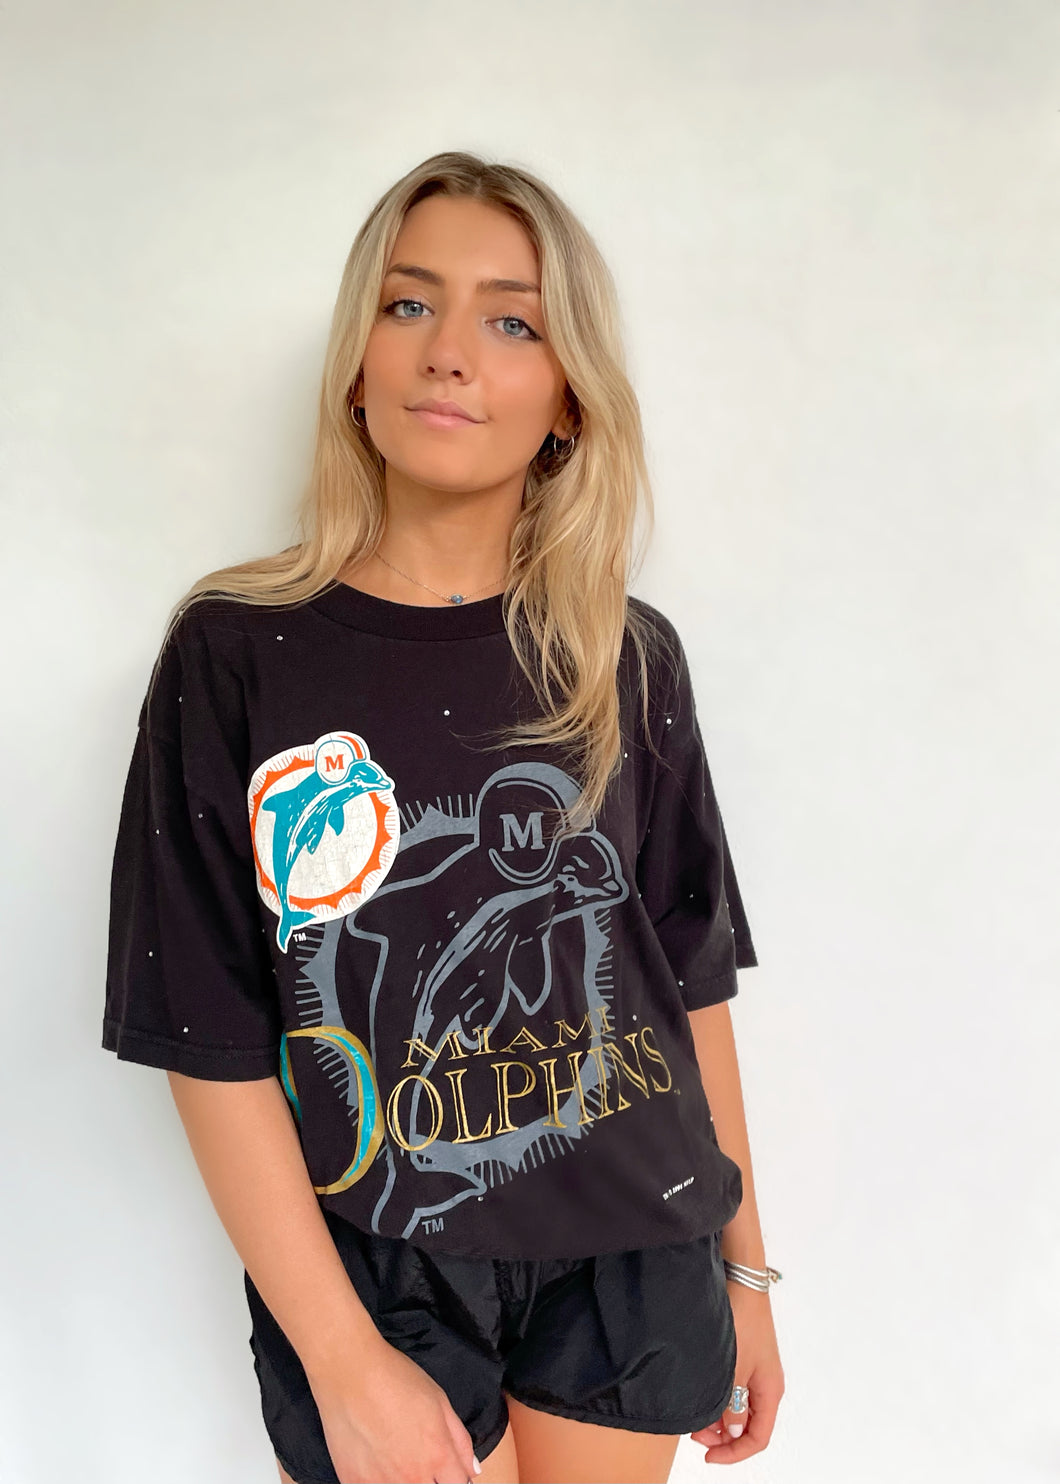 Miami Dolphins, NFL One of a KIND Vintage Tee with Overall Crystal Design